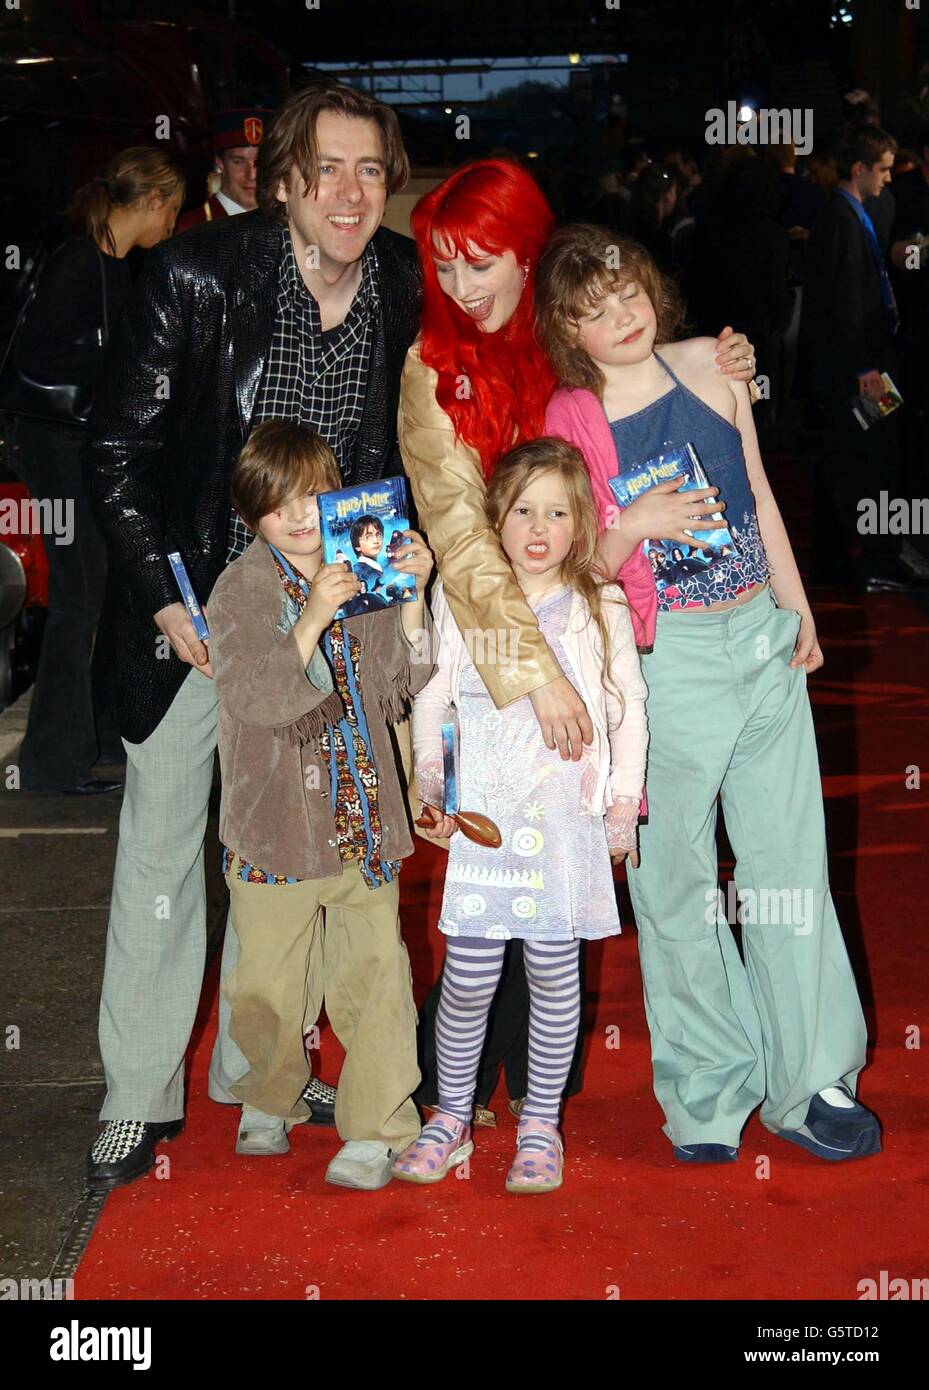 Jonathan Ross and his wife Jane Goldman with their children (from left) Harvey Kirby, Honey Kinny and Betty Kitten at King's Cross St Pancras, central London, for the Harry Potter & The Philosopher's Stone - DVD & video launch party. Stock Photo